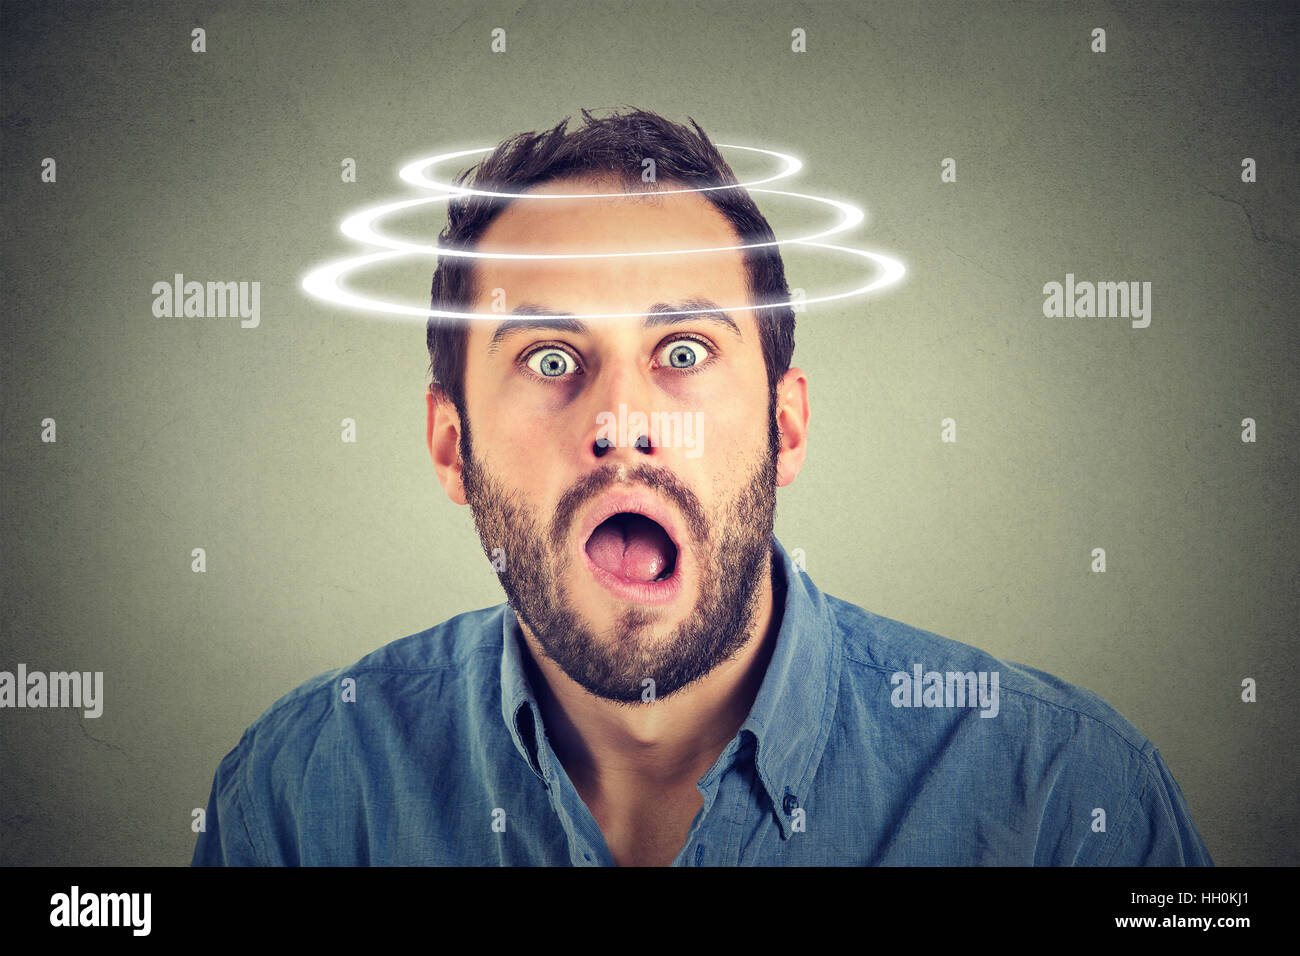 Head is spinning. Surprise astonished man. man looking surprised in disbelief wide open mouth isolated on gray background. Stock Photo